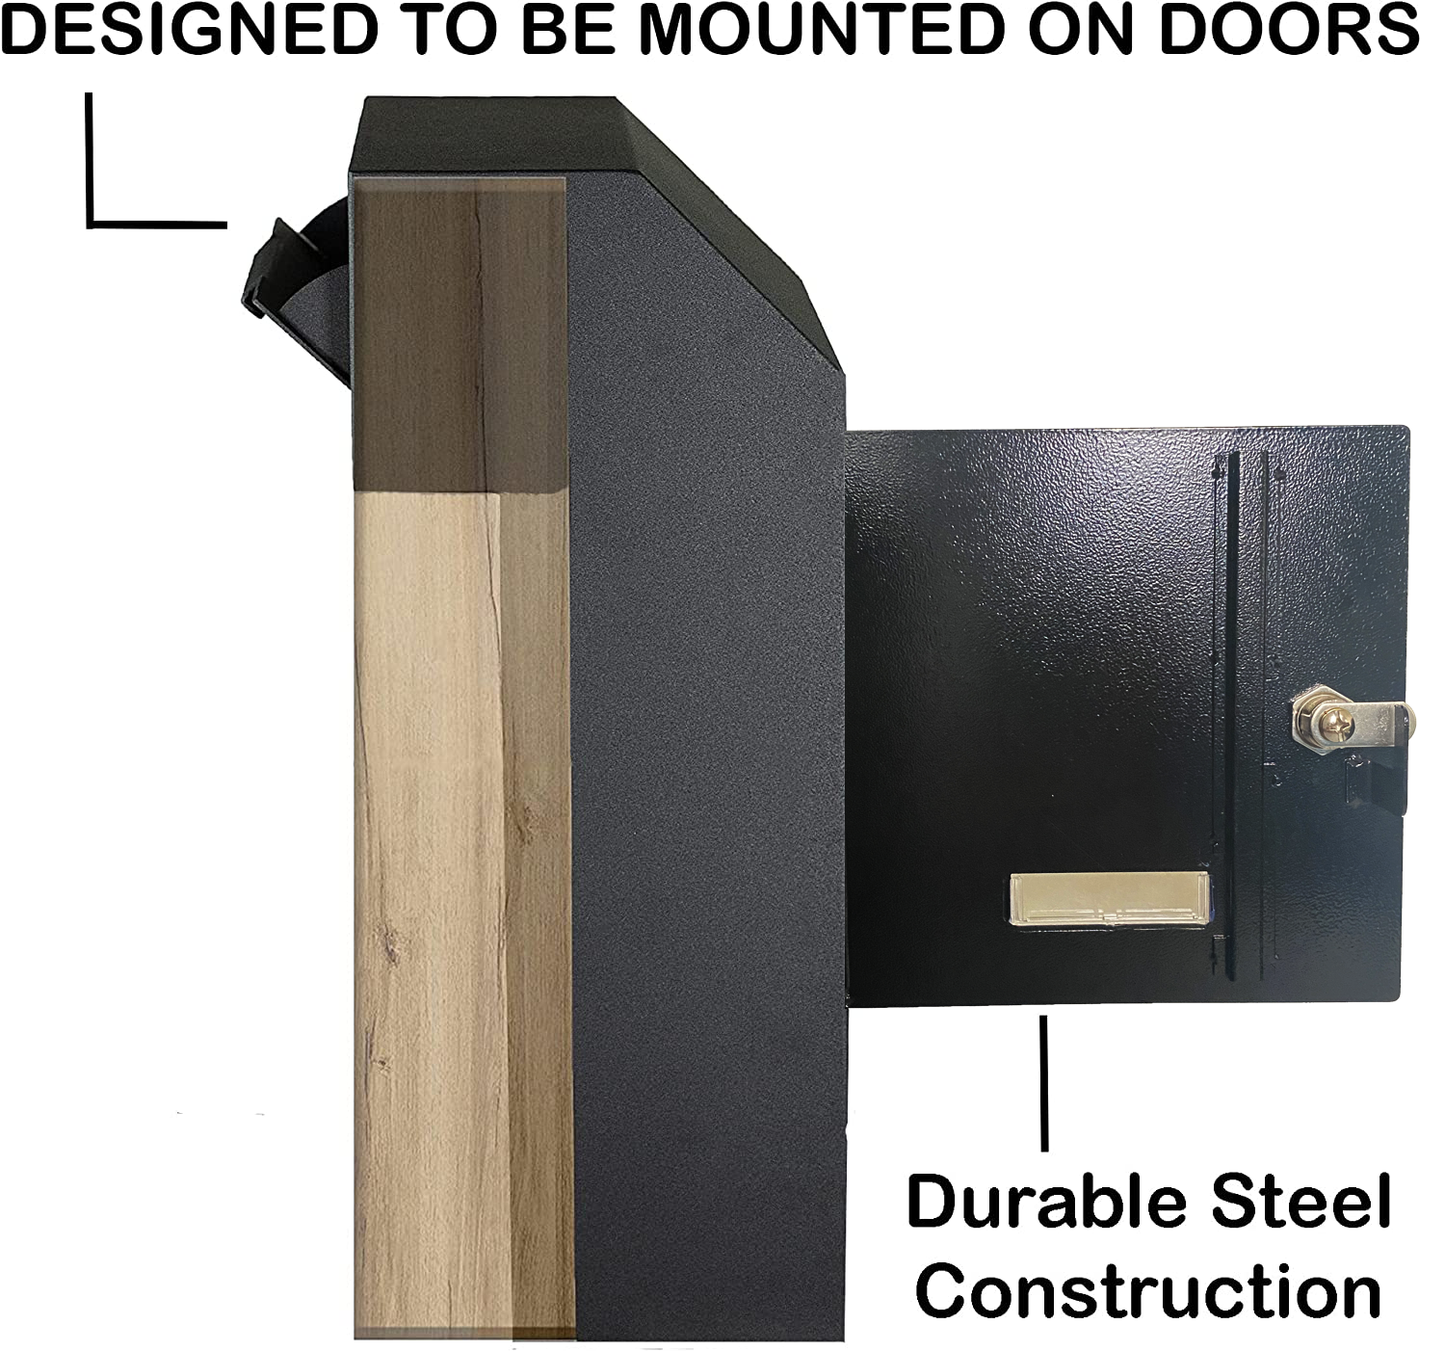 M-D1A-H - Door Drop Box for Mail, Rent, Deposit, and Night Key - Through The Door Locking Steel Mailbox with Rear Access | 9.75” L x 4.25” W x 14.75” H (Black)